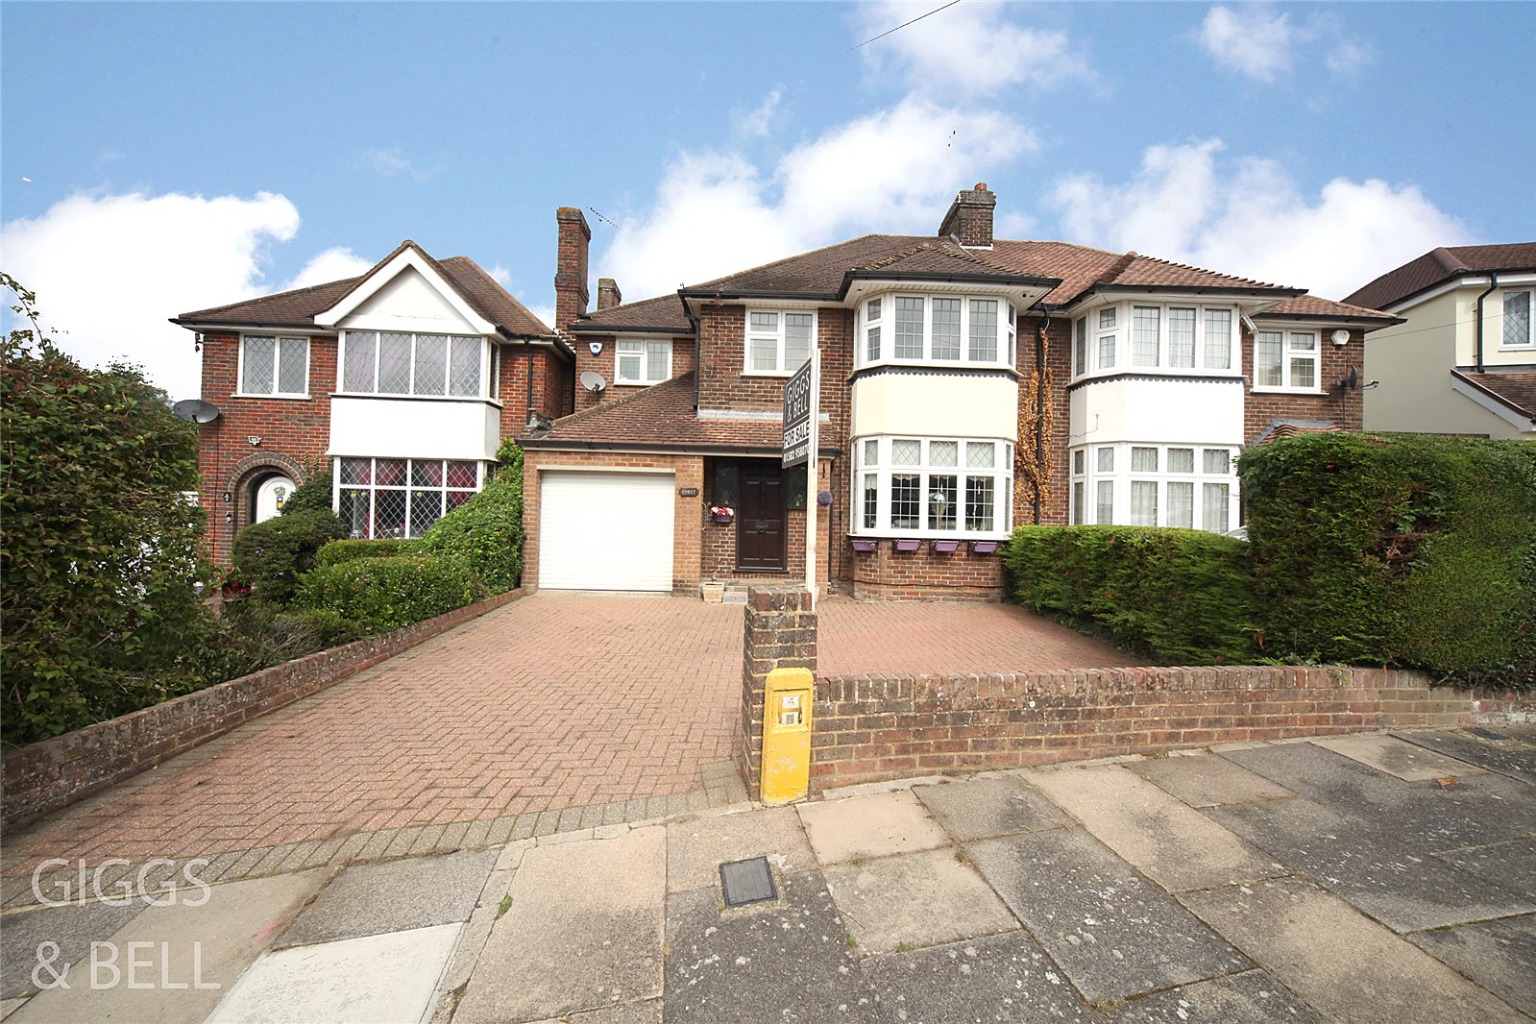 4 bed semi-detached house for sale in Knoll Rise, Luton - Property Image 1